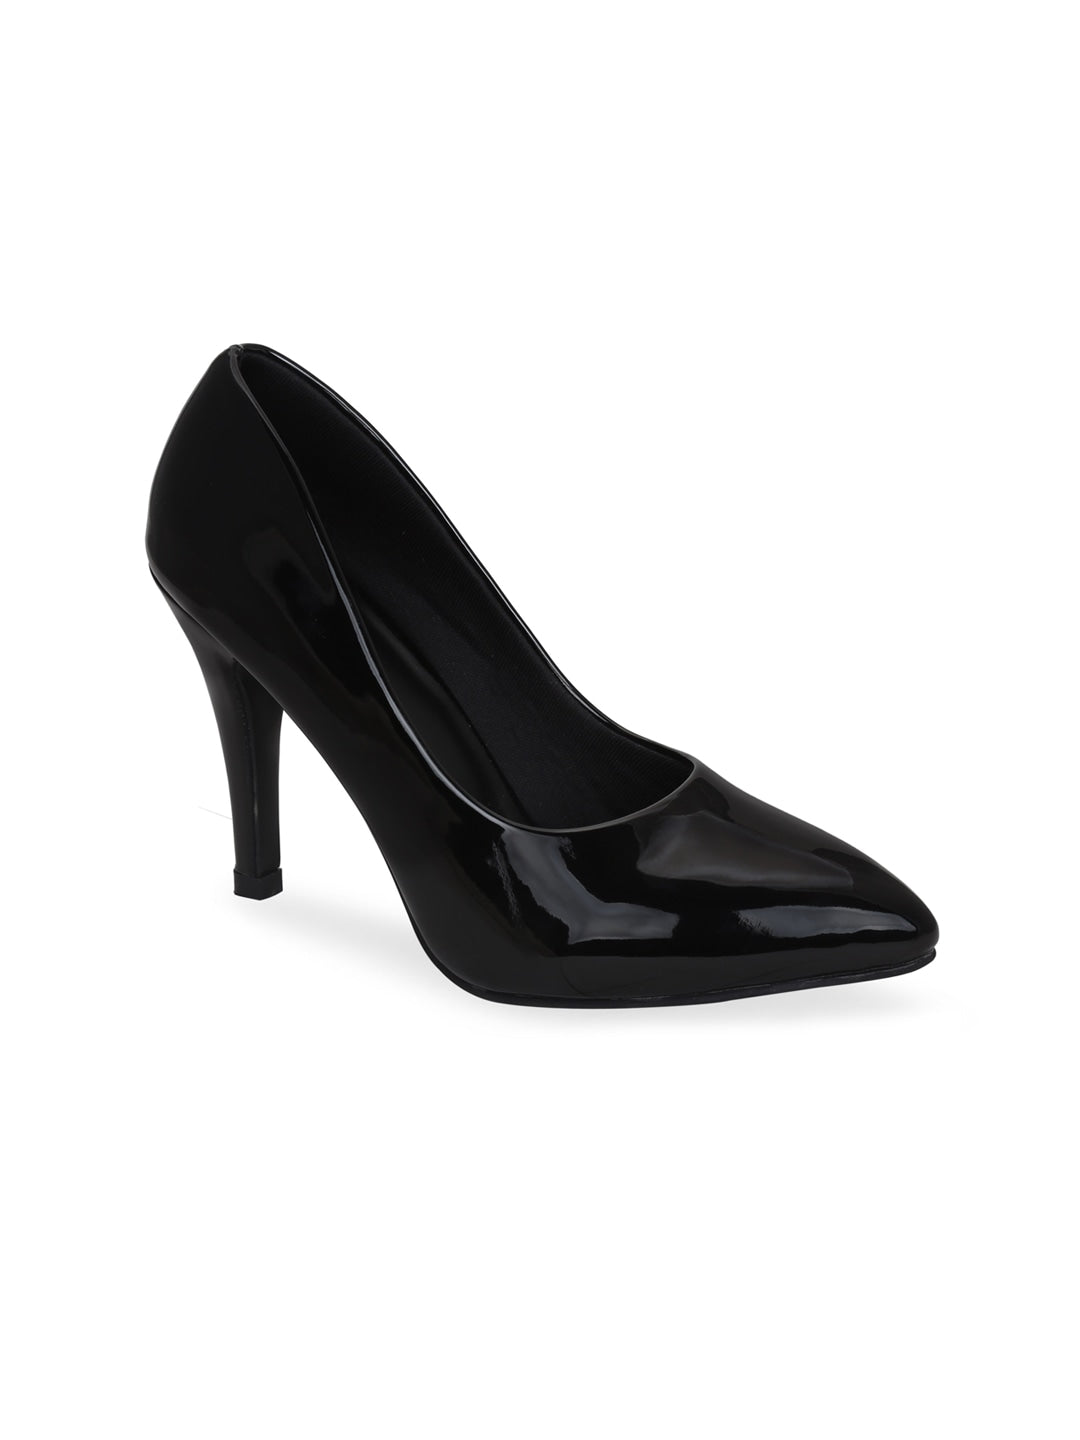 Get Glamr - Pumps - Image Swatches with Price - Black - f7be8b44-a93e-4aee-a011-7e51ed833bb41648185056441GetGlamrBlackWedgePumps2_aa10fc02-5b90-4ae7-bec1-6332c8abc433